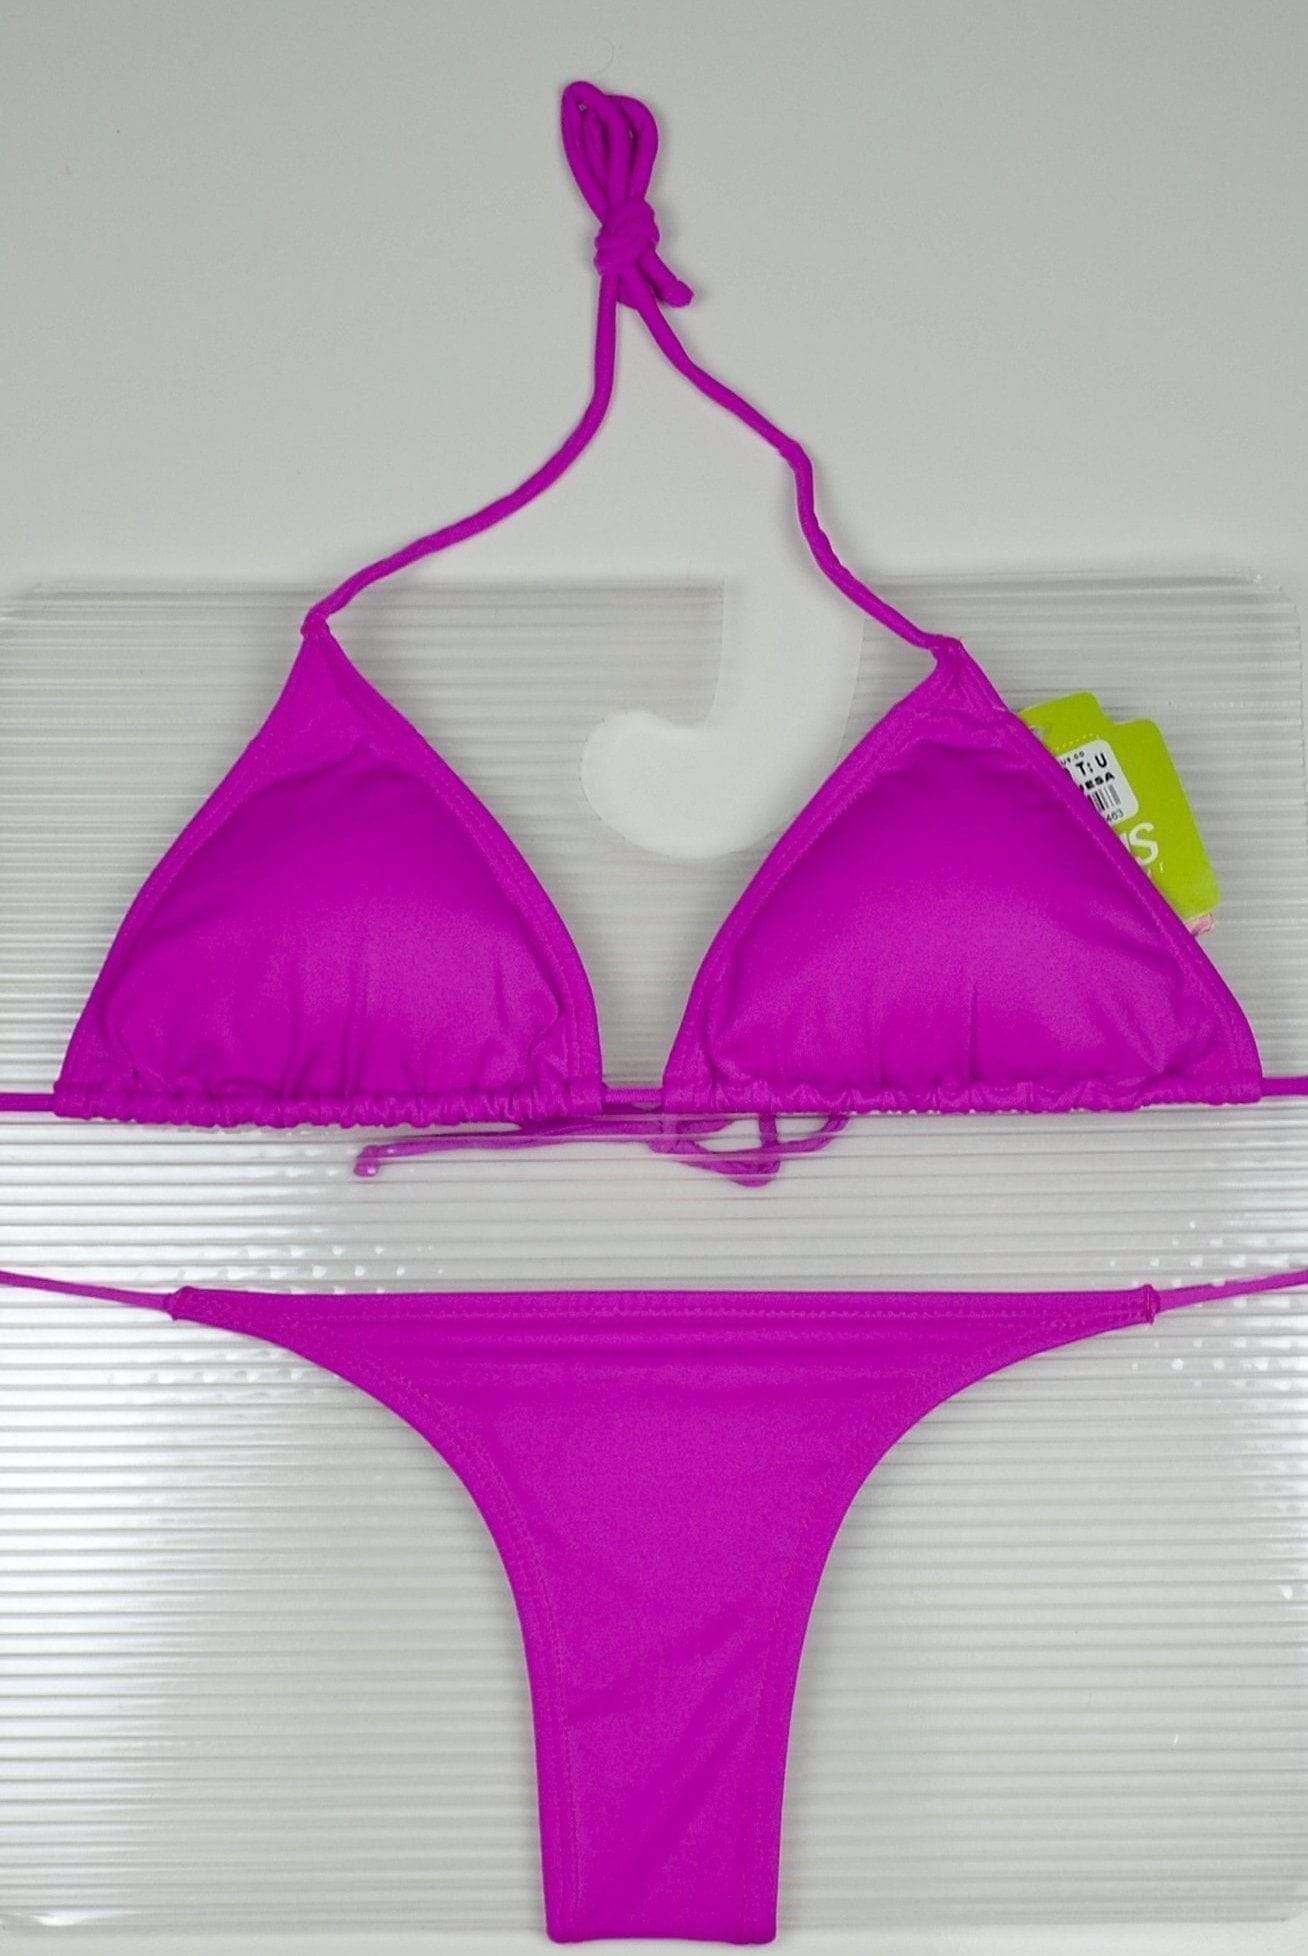 Irgus Swimwear Apparel & Accessories > Clothing > Swimwear One Size / Purple Black 3 Piece Set Triangle Top, Side Tie Thong & Side Tie Scrunch Bottom Bikini Swimsuit (Many colors available) Irgus Hot Pink Thong G-String Scrunch Bikini Swimsuit | SHOP NOW